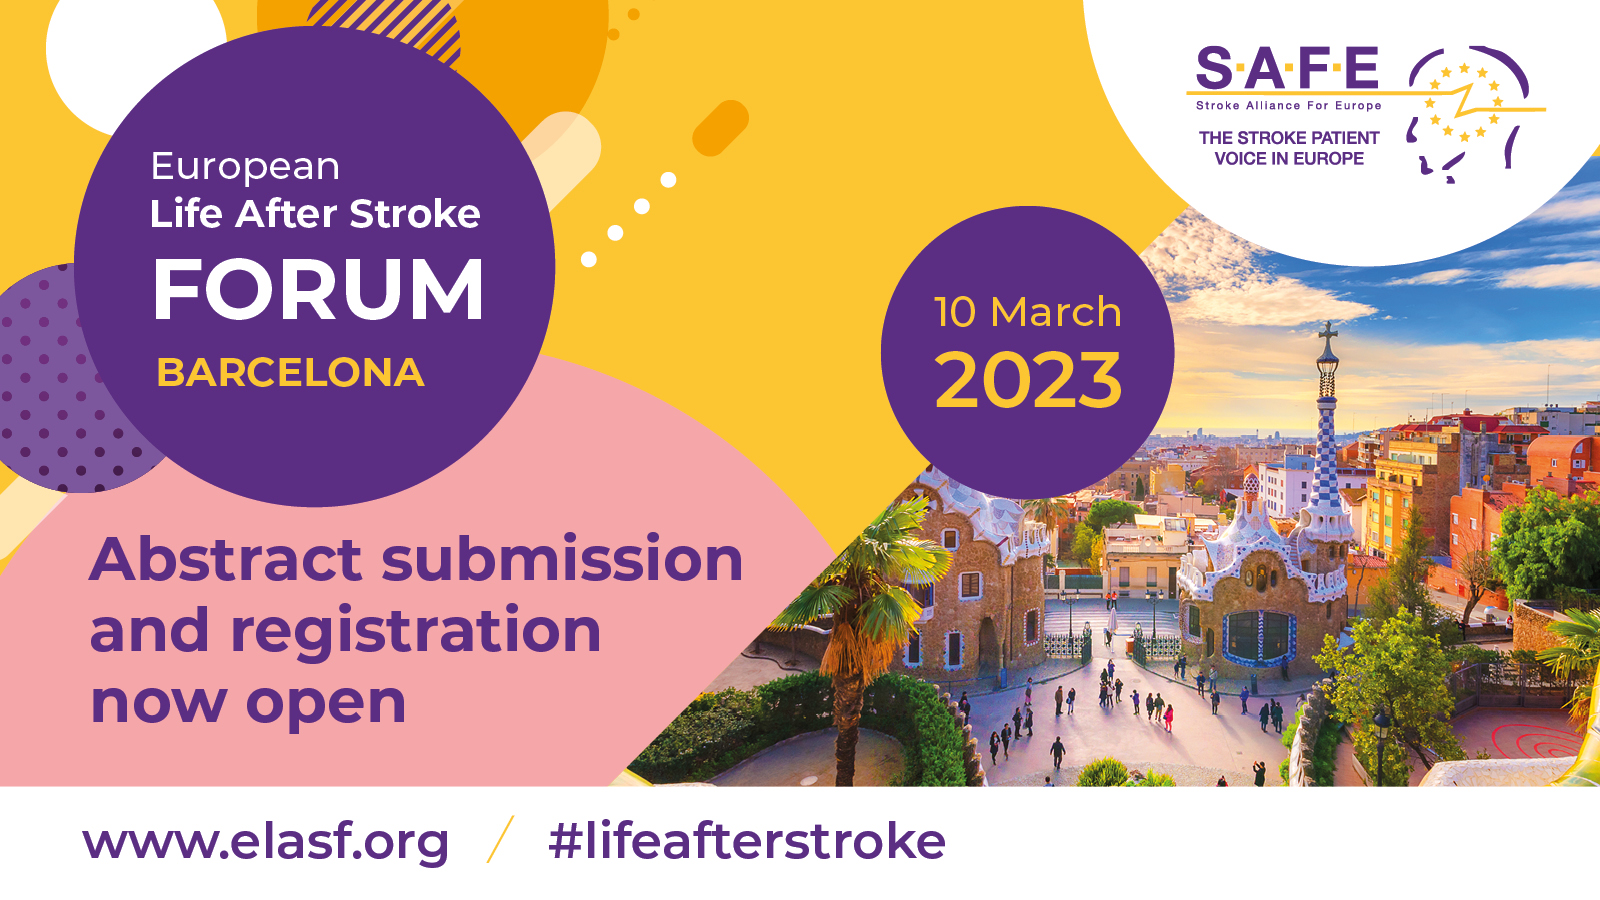 Speakers confirmed for our first Life After Stroke Forum, 10 March 2023, Barcelona